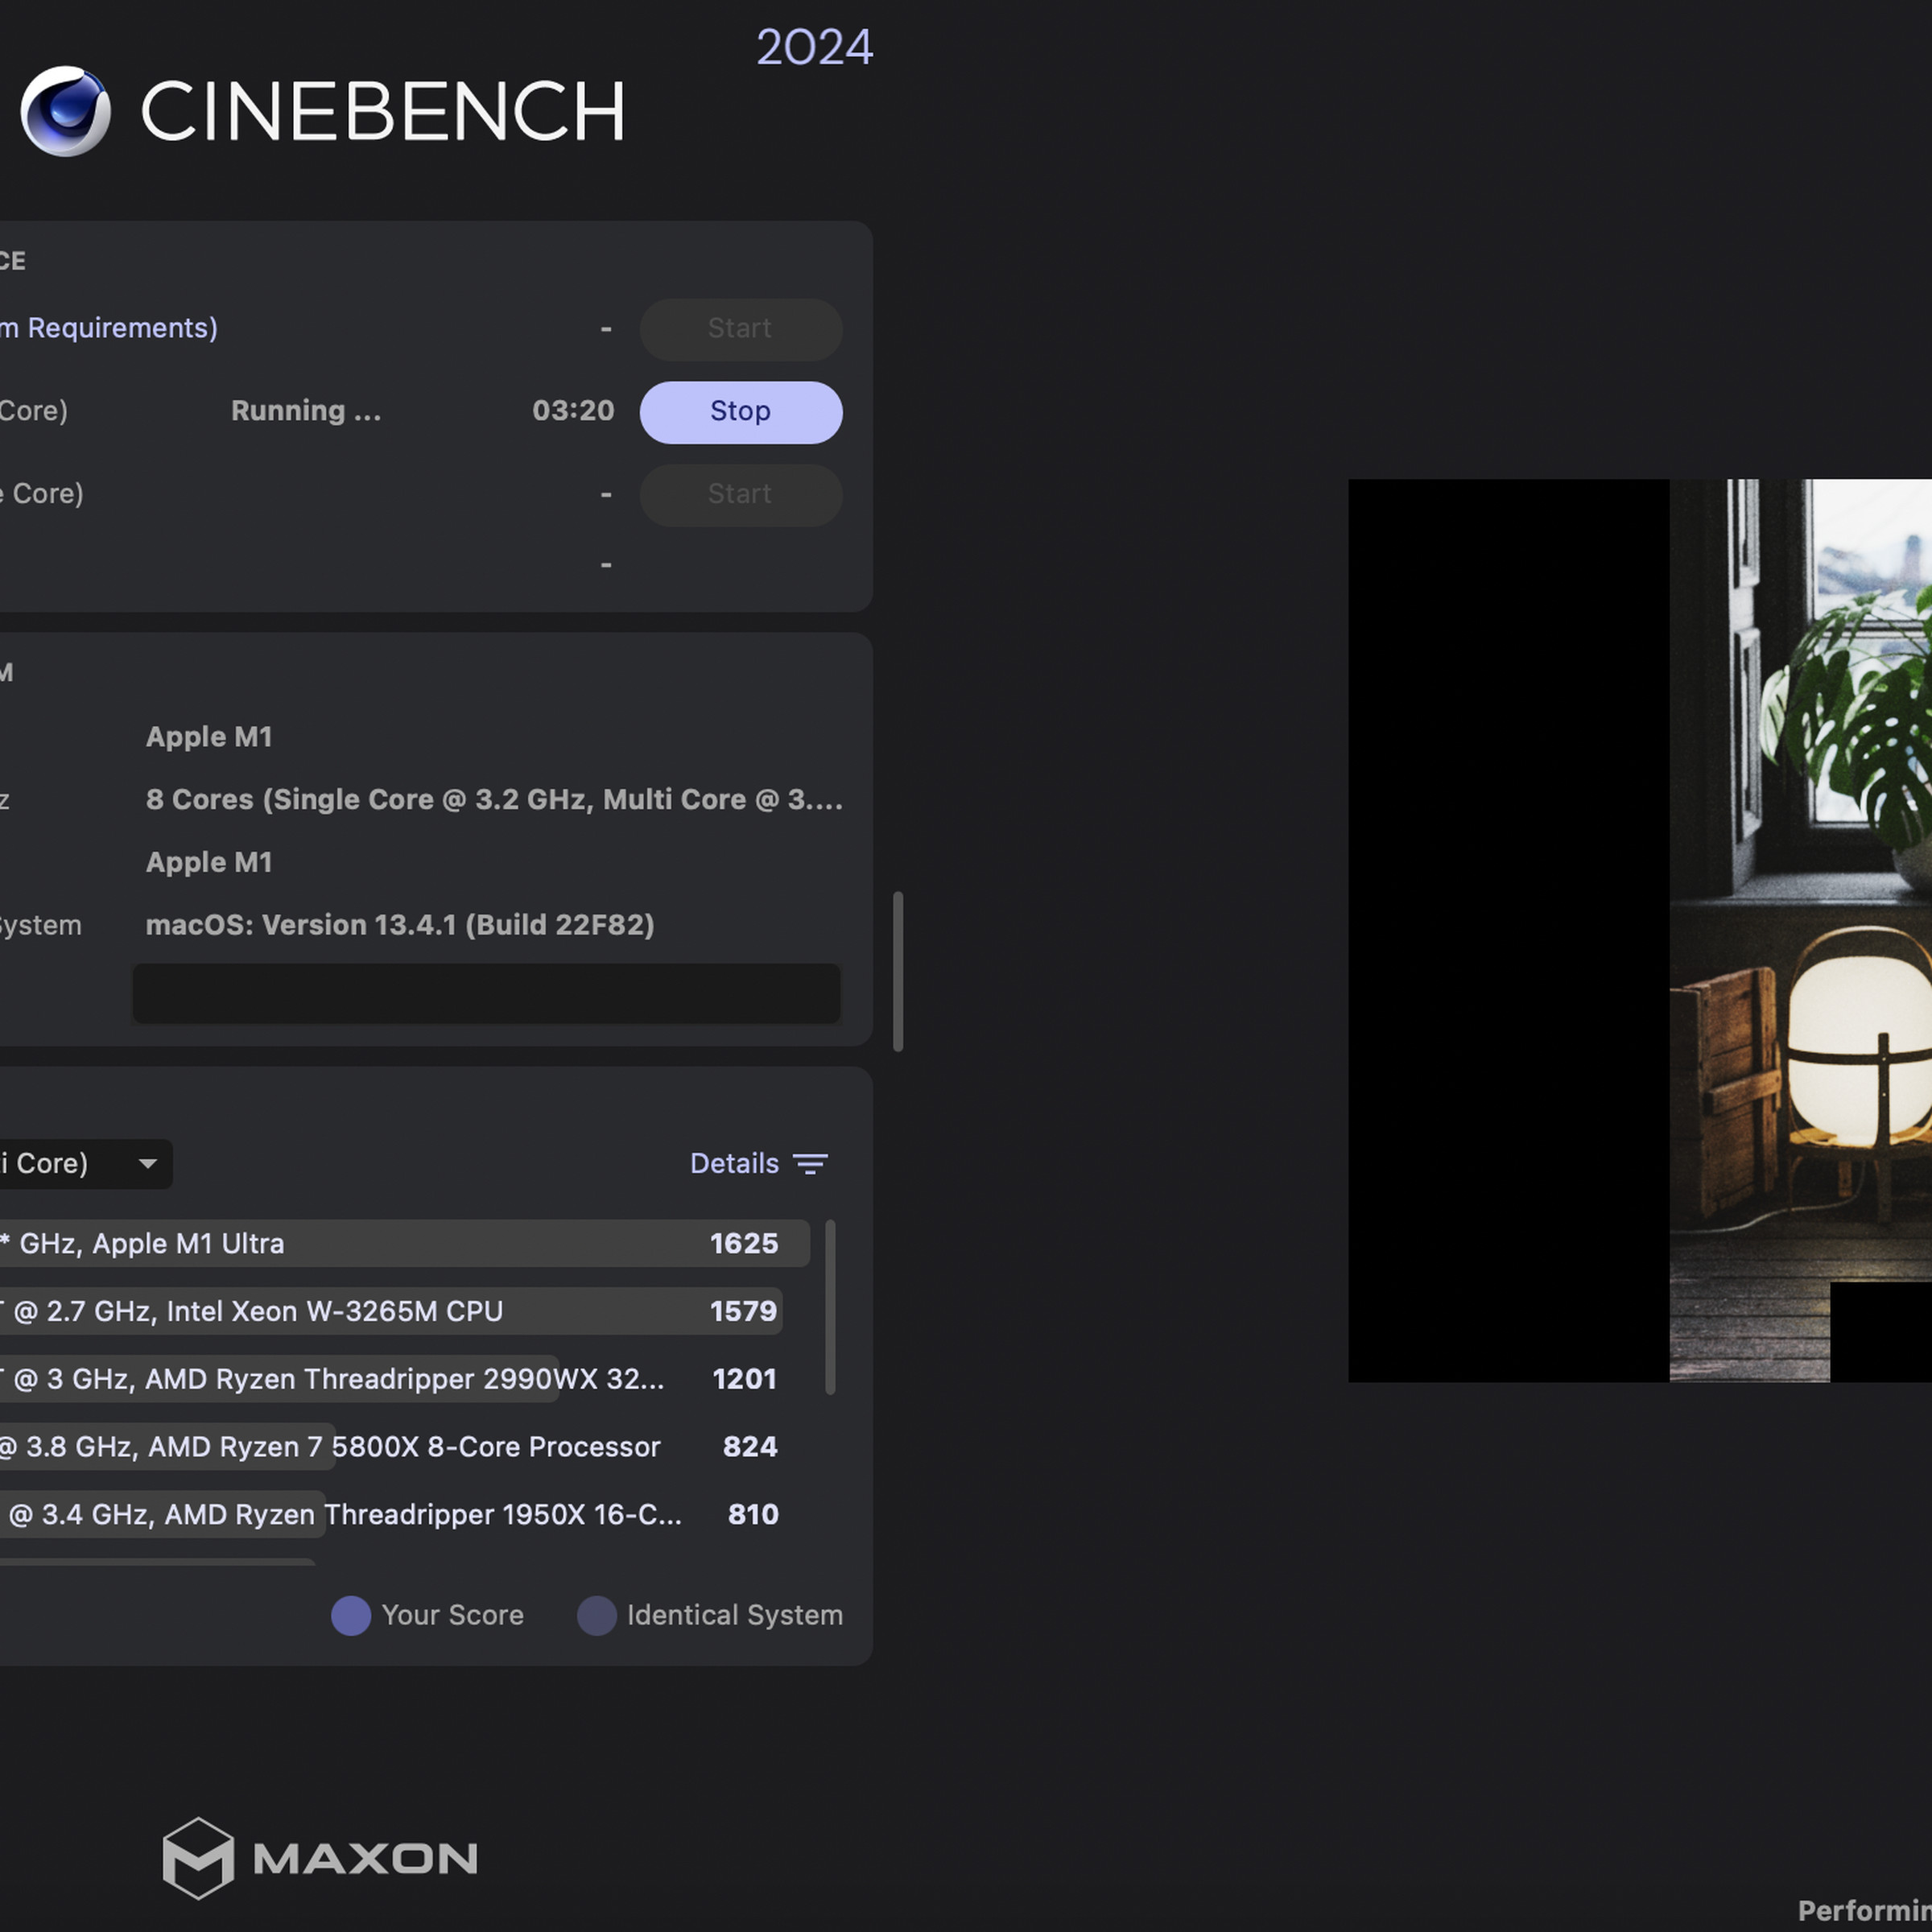 A screenshot of Cinebench 2024 in the middle of rendering the multi-core benchmark.